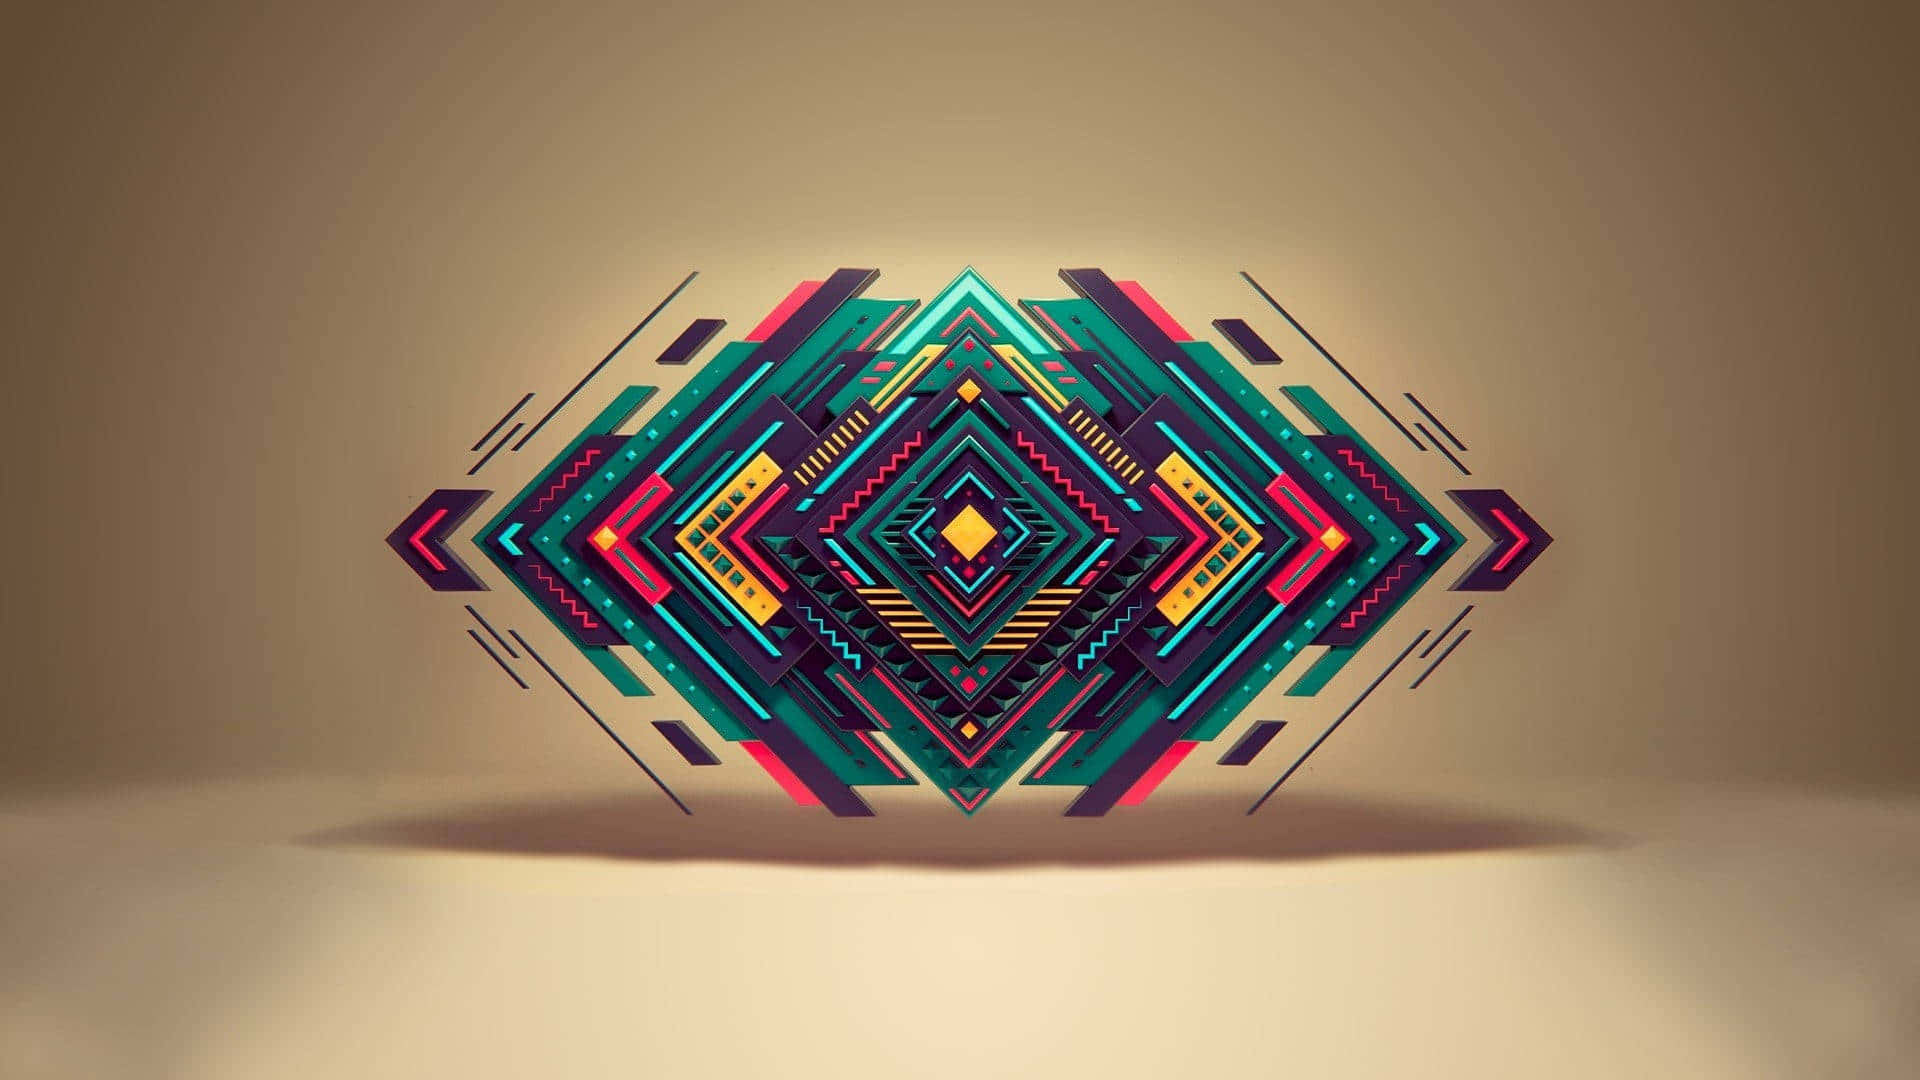 Vibrant Abstract Artwork with Minimalistic Elements Wallpaper